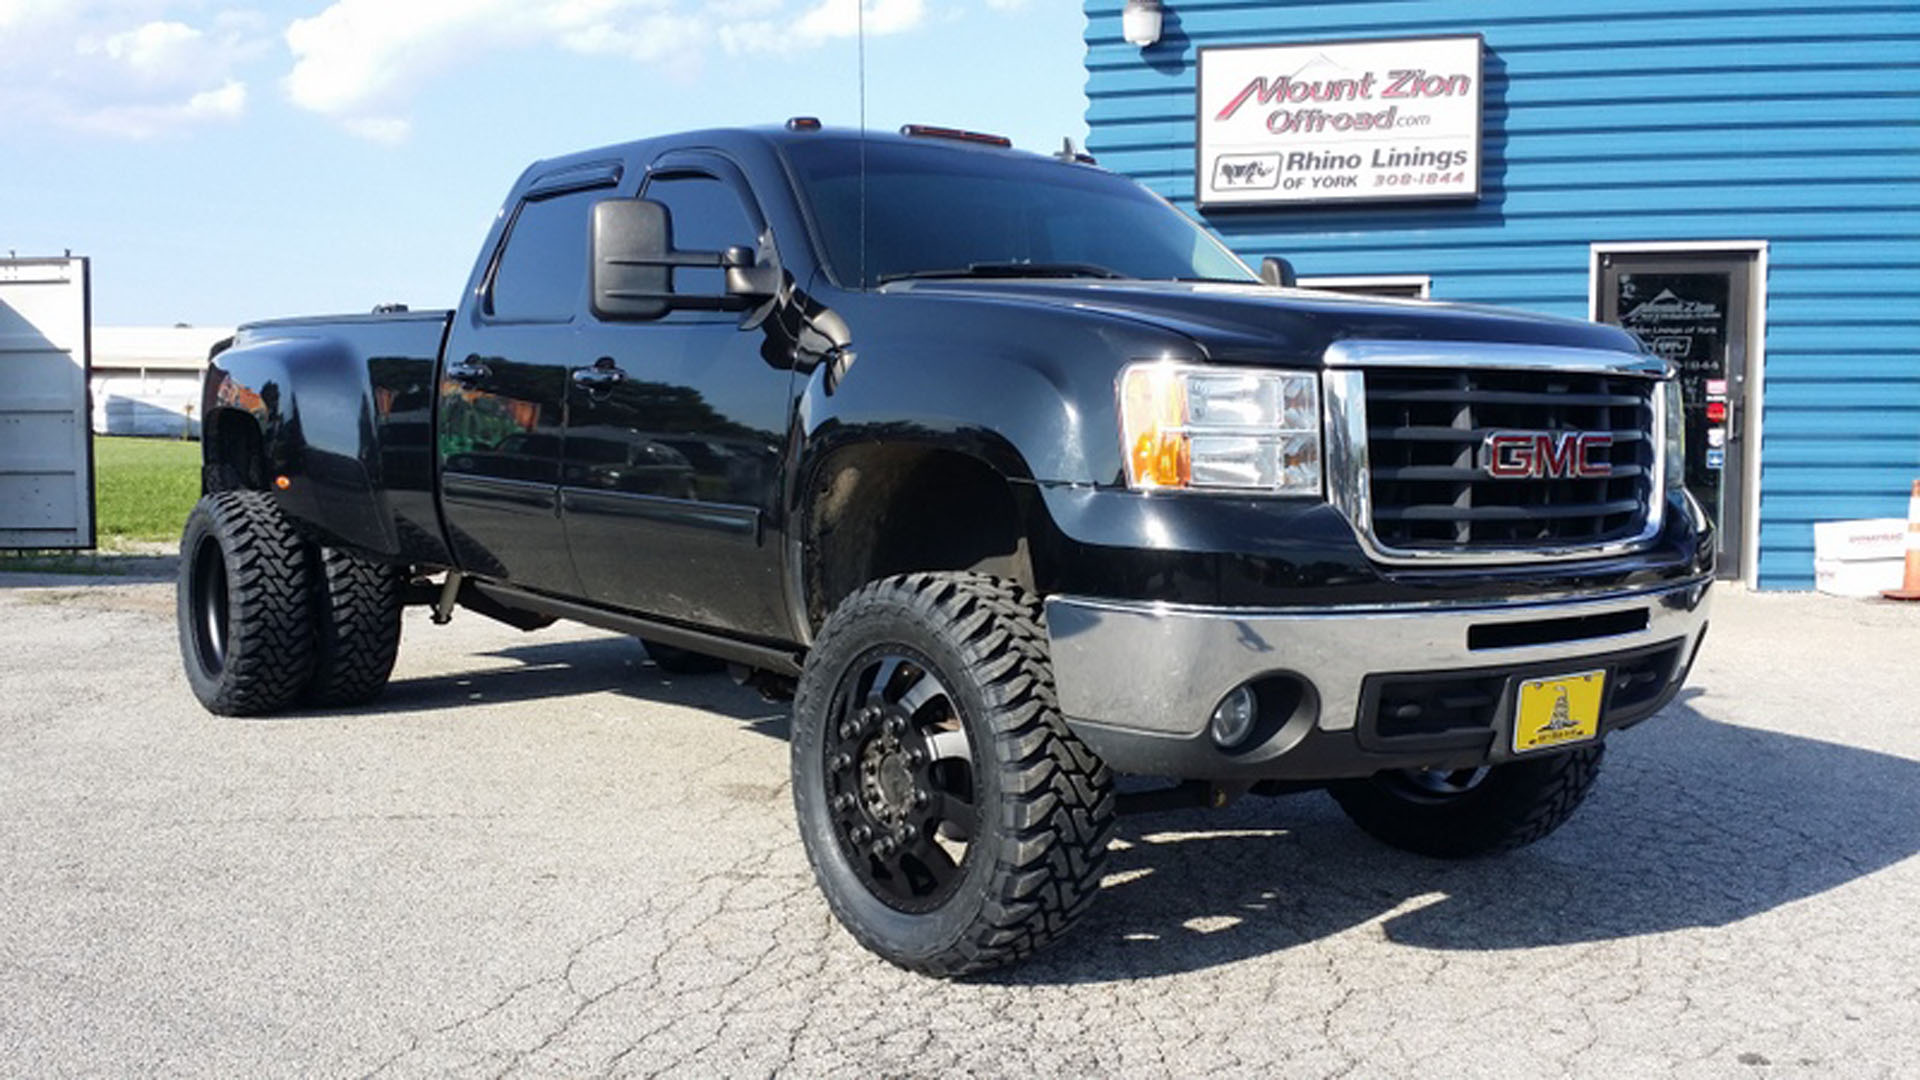 The coolest part about this project was the 8 lug to 10 Lug SEMI Truck adap...